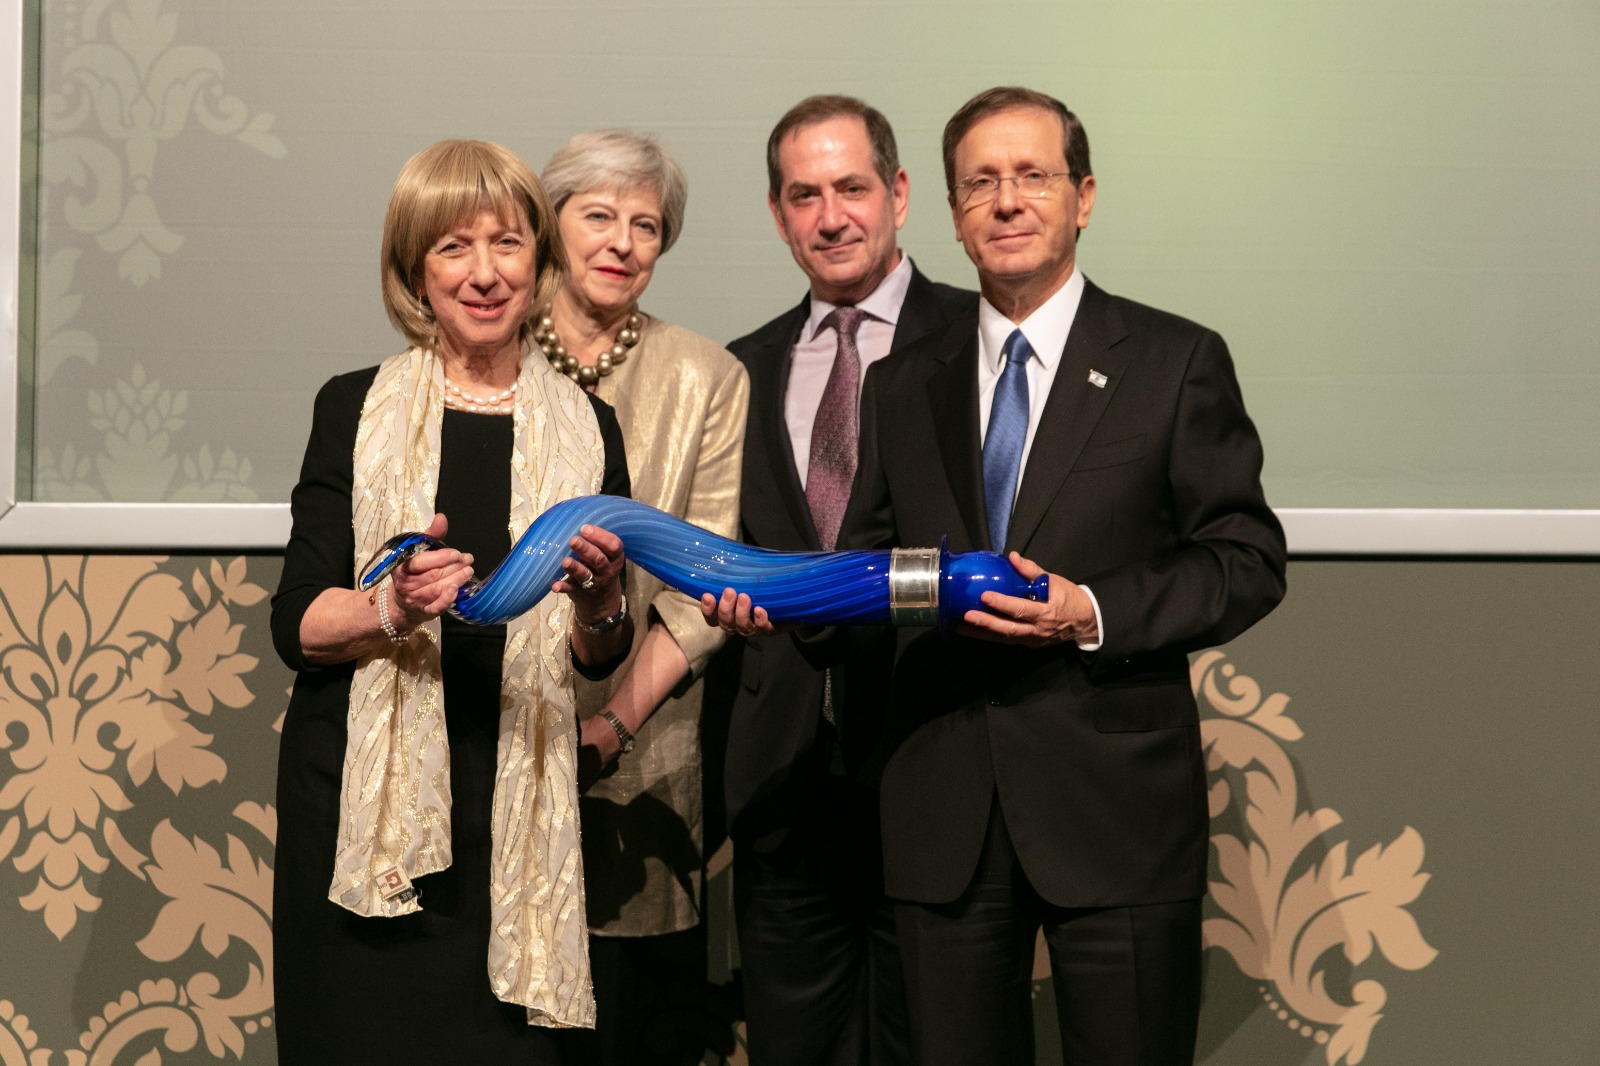 From L to R: Lady Elaine Sacks, former Prime Minister of the United Kingdom Theresa May, Genesis Prize Foundation Founder and Chairman Stan Polovets, President of Israel Isaac Herzog. Credit: Thomas Alexander/Genesis Prize Foundation